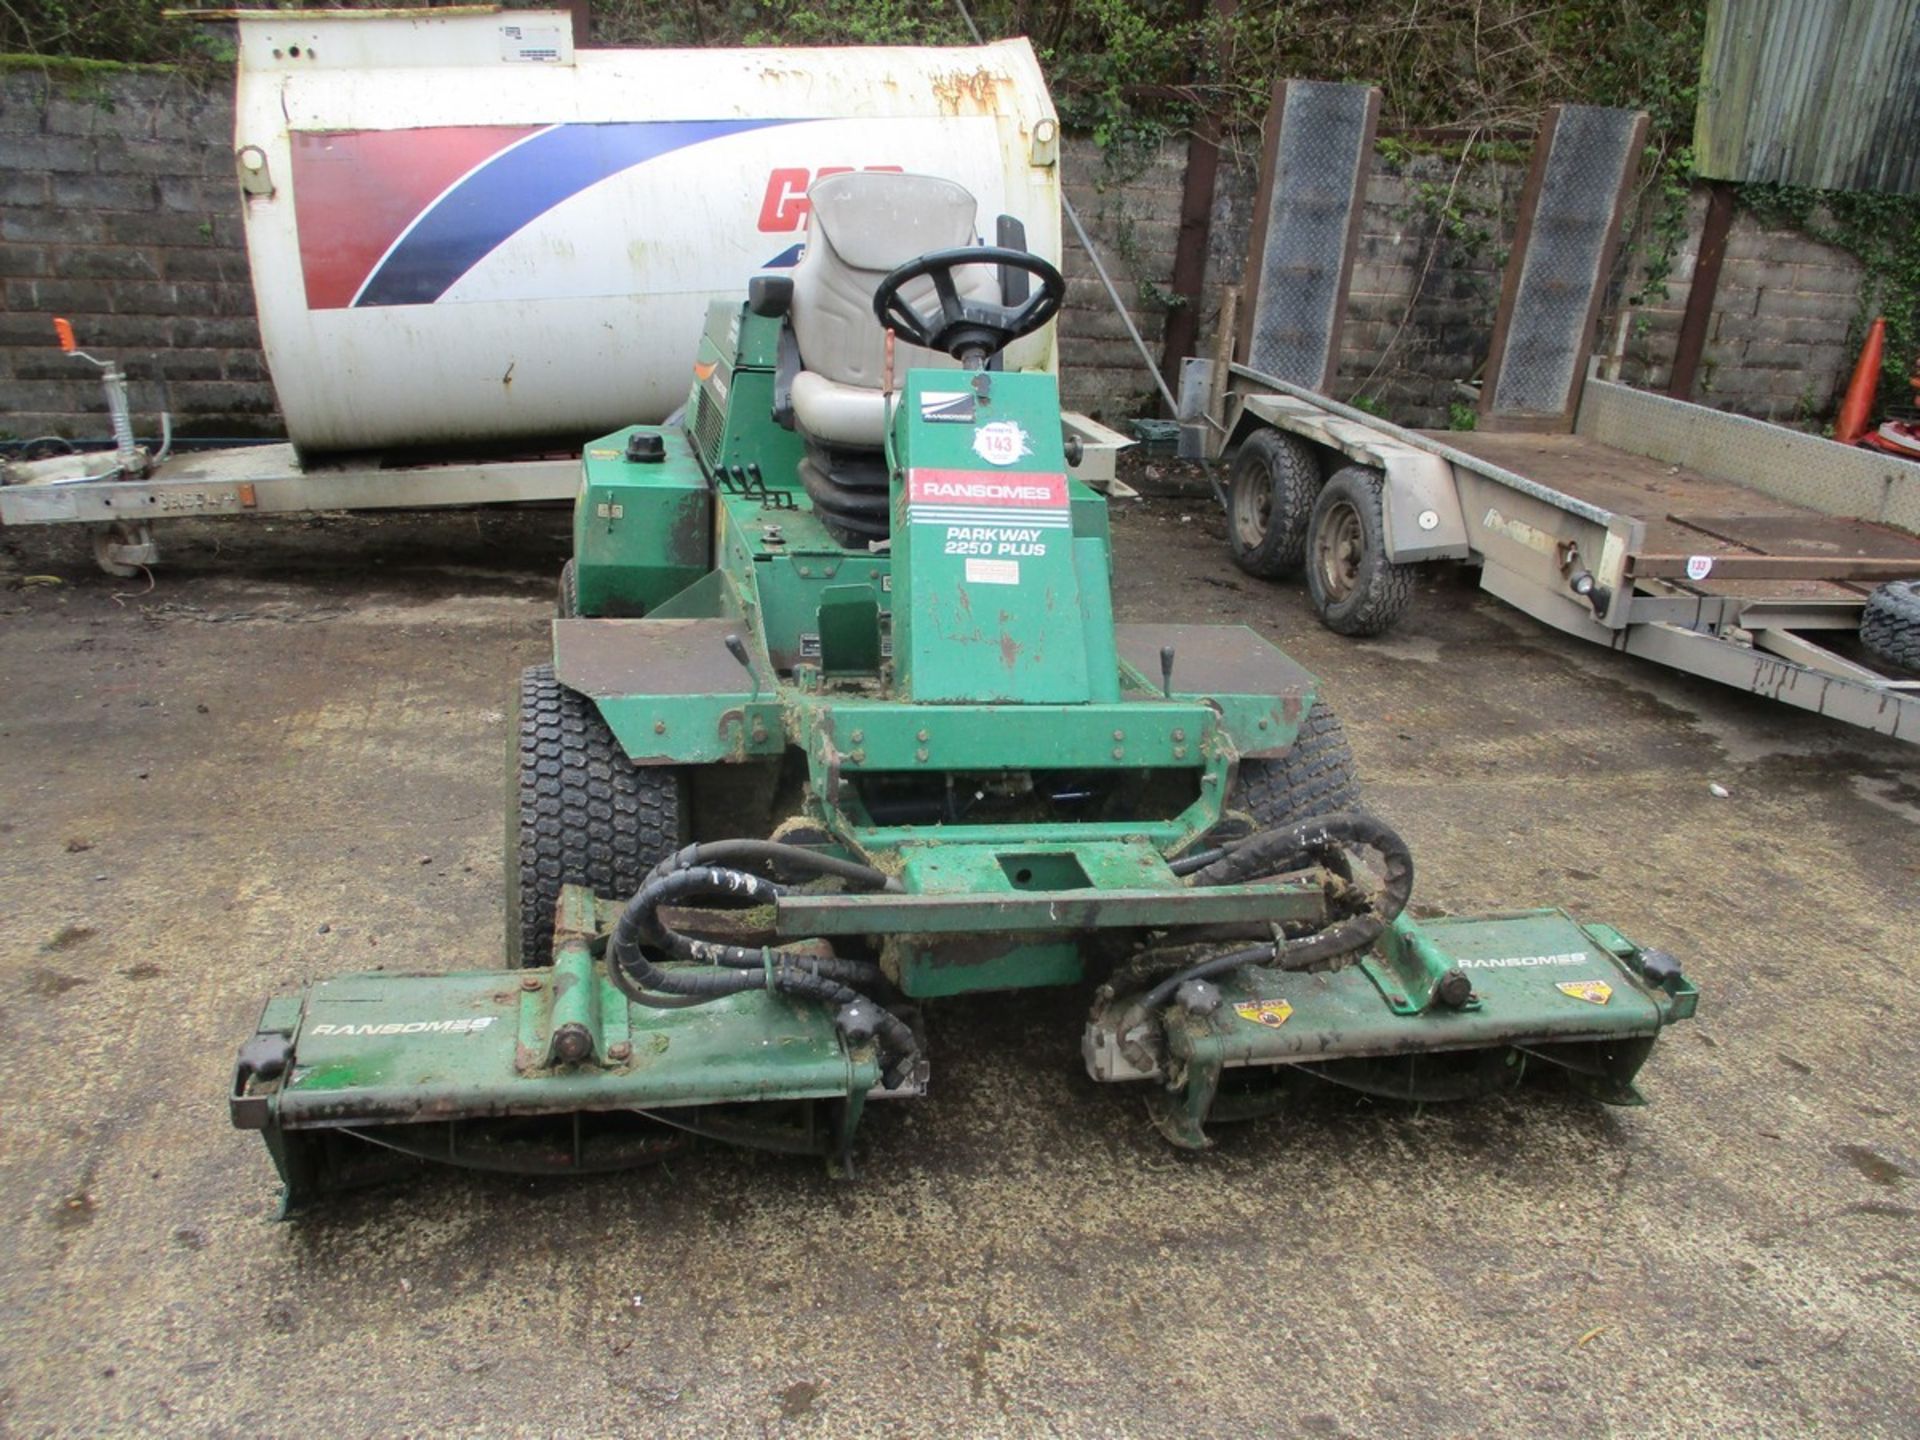 RANSOMES PARKWAY 2250 PLUS RIDE ON MOWER - Image 2 of 6